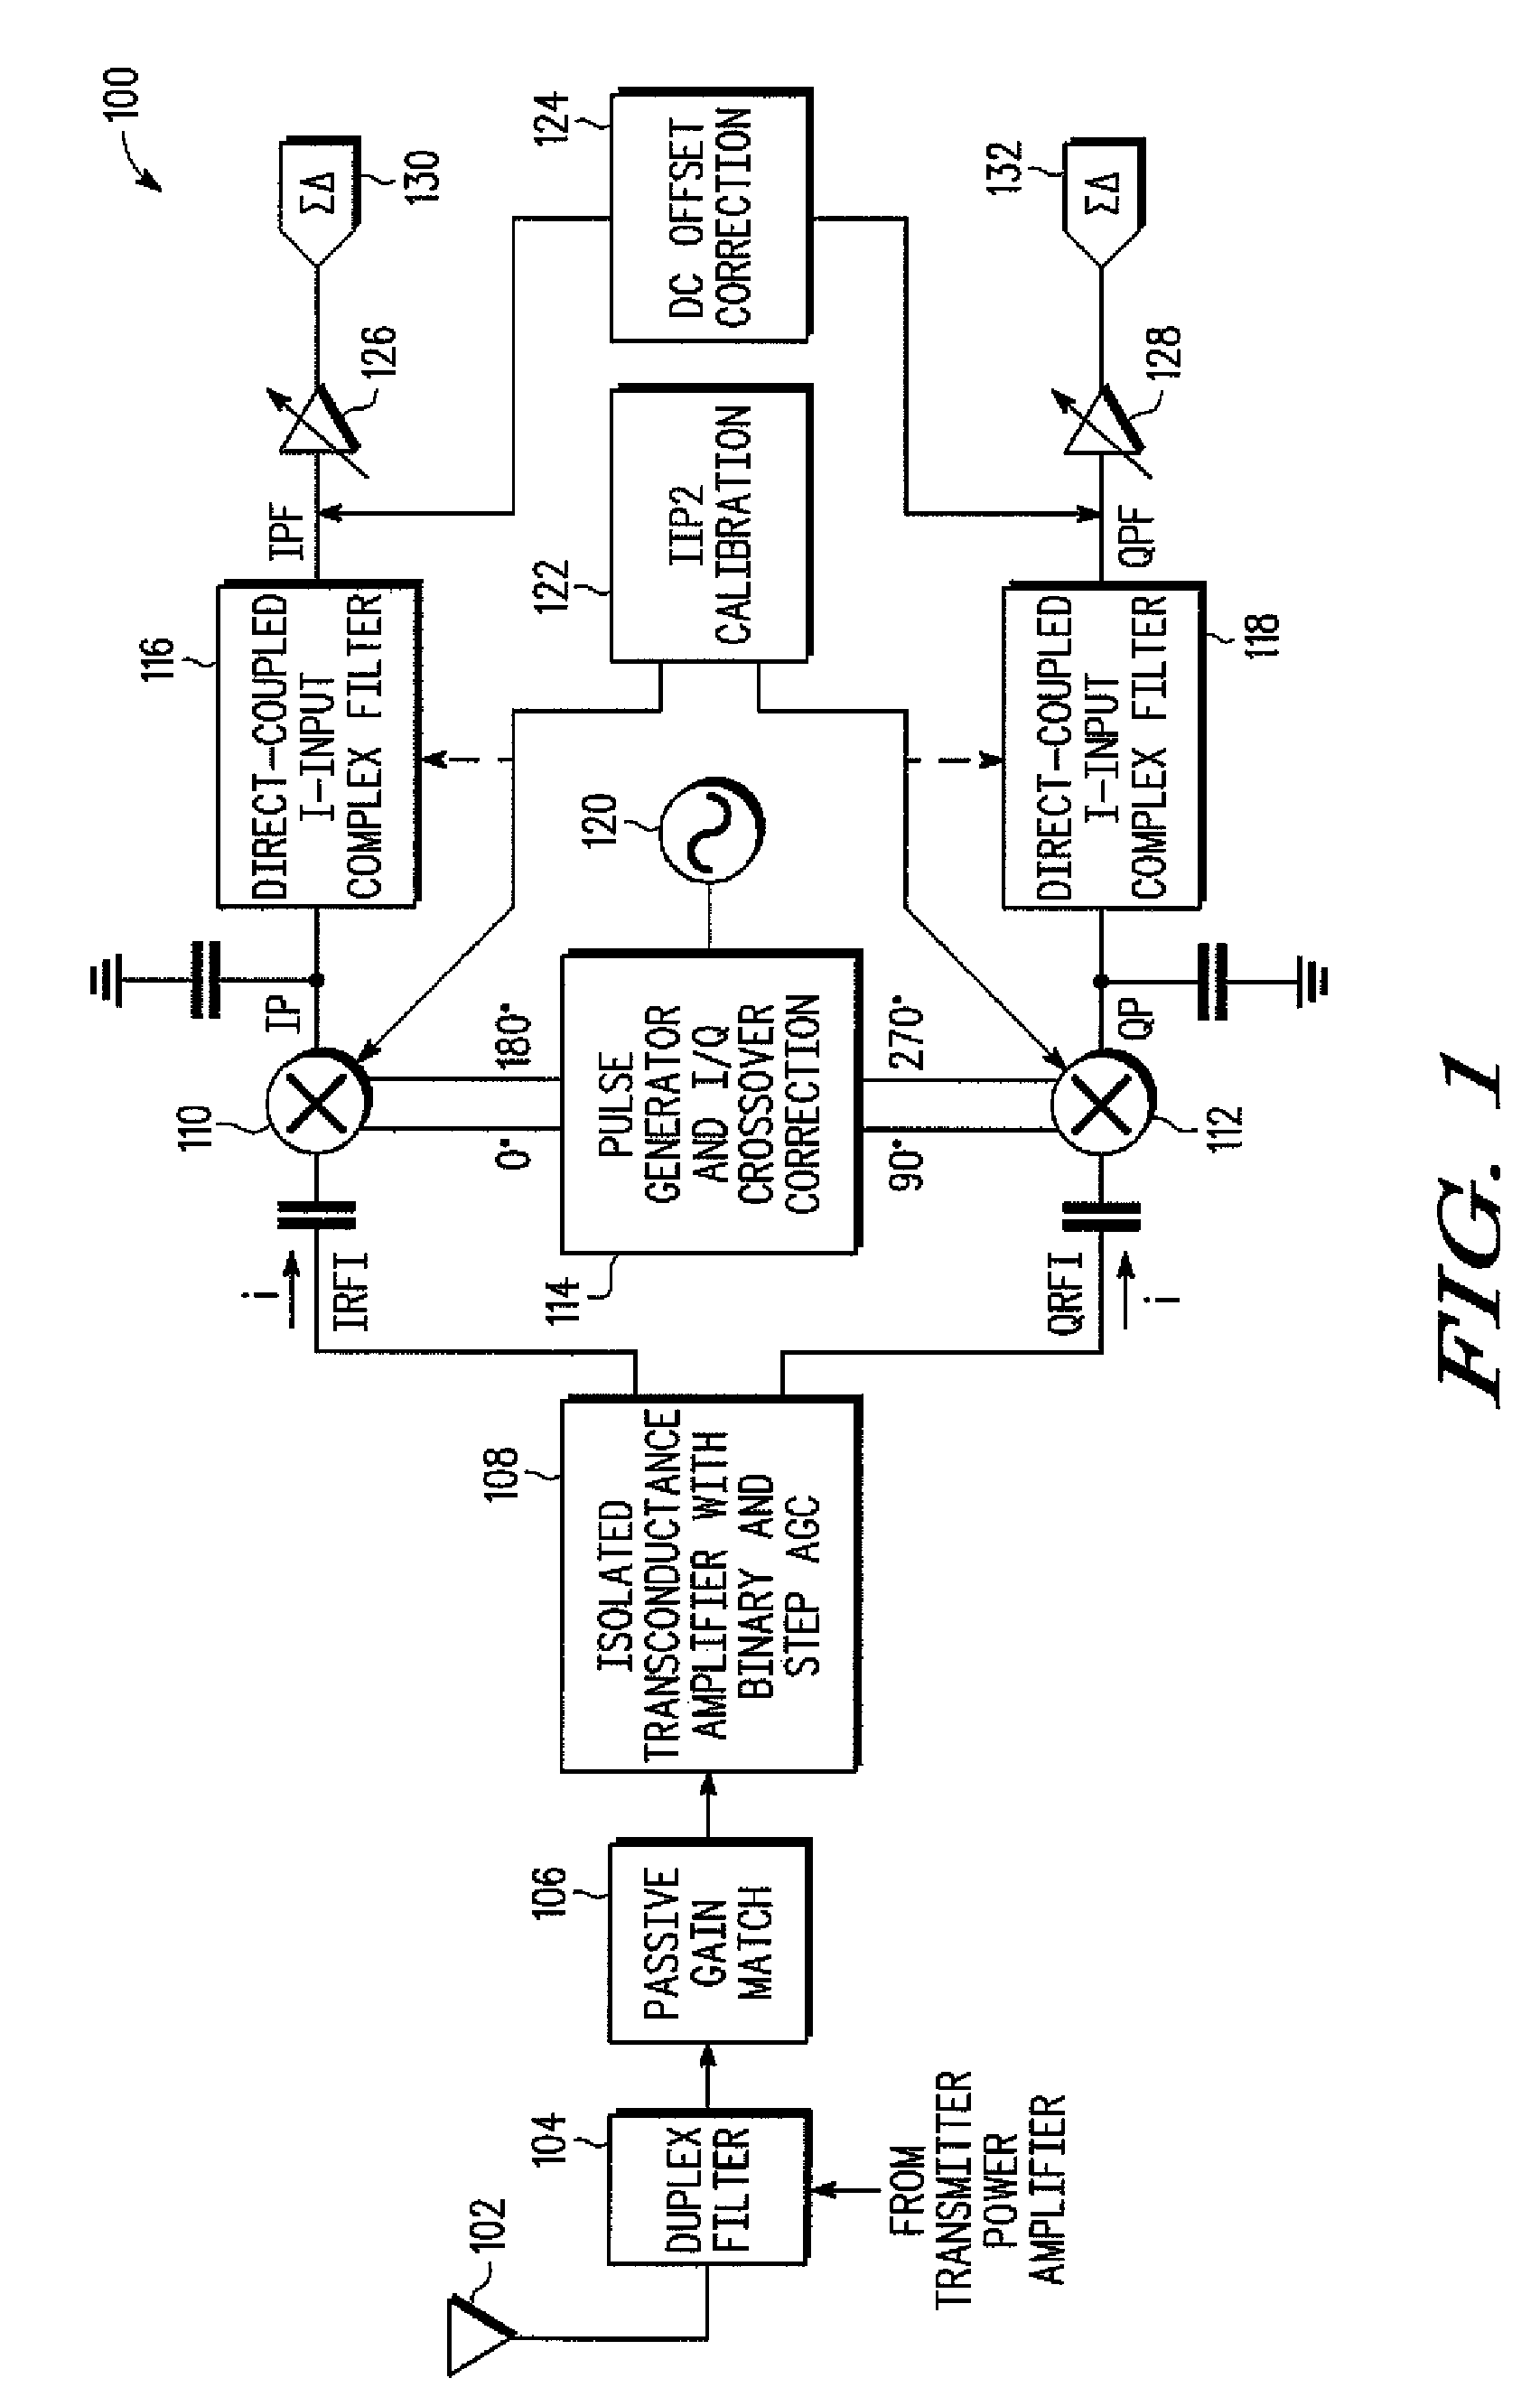 Split channel receiver with very low second order intermodulation